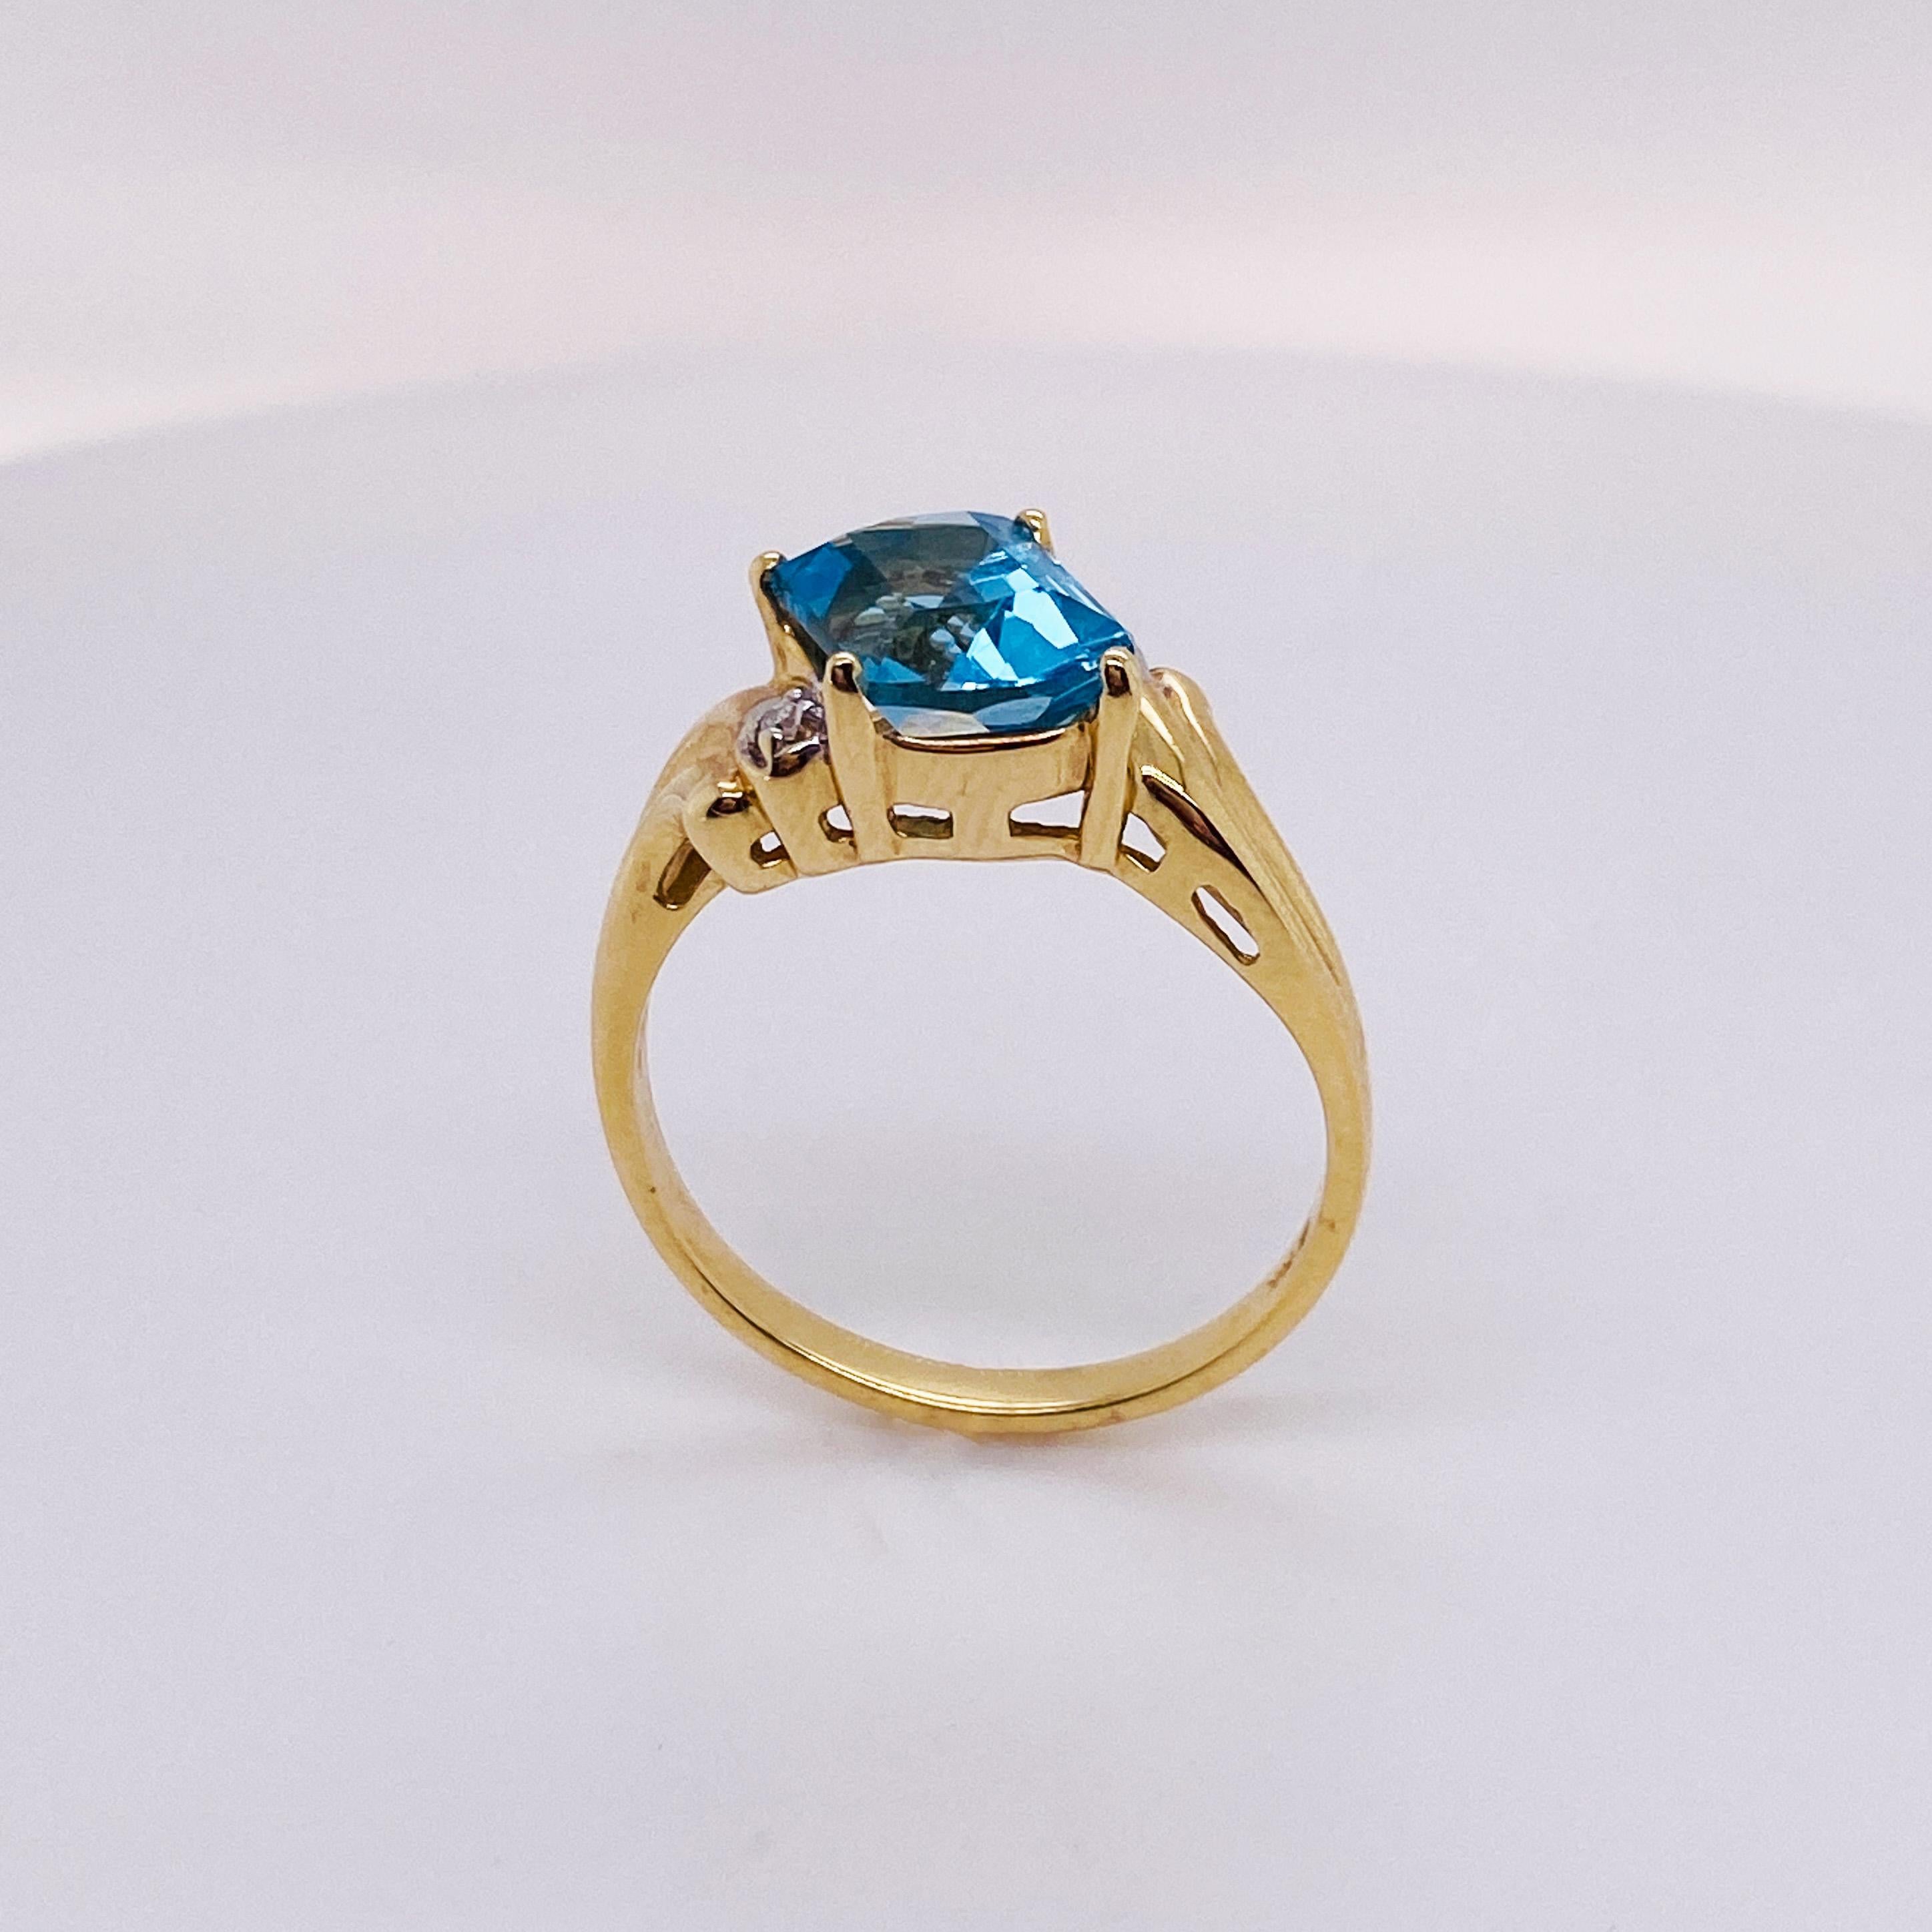 Mixed Cut 1.25 Carat Fancy Cut Blue Topaz, 14k Gold Bypass Ring with Diamond Accents For Sale